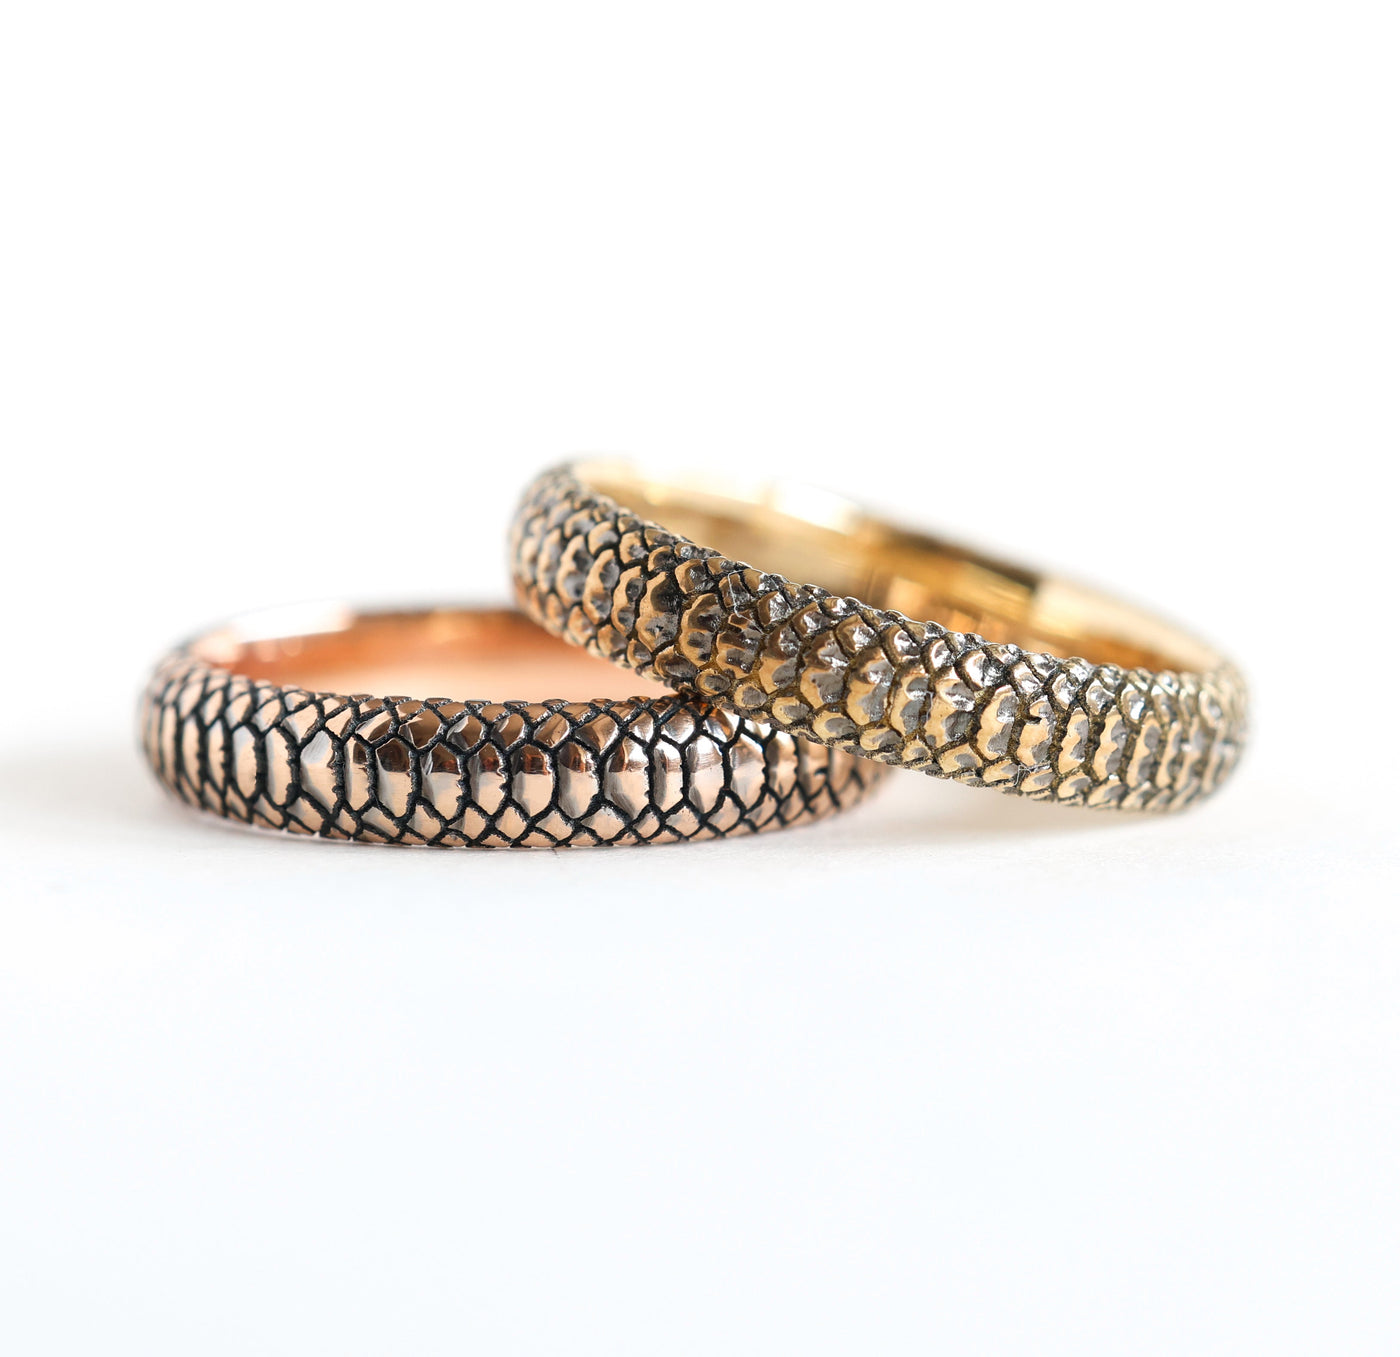 Close-up of a unique gold snake band ring with textured design. Band width options: 3mm, 4mm, 5mm, 6mm. Material choices include 14k or 18k gold and platinum. Customizable with gemstones.